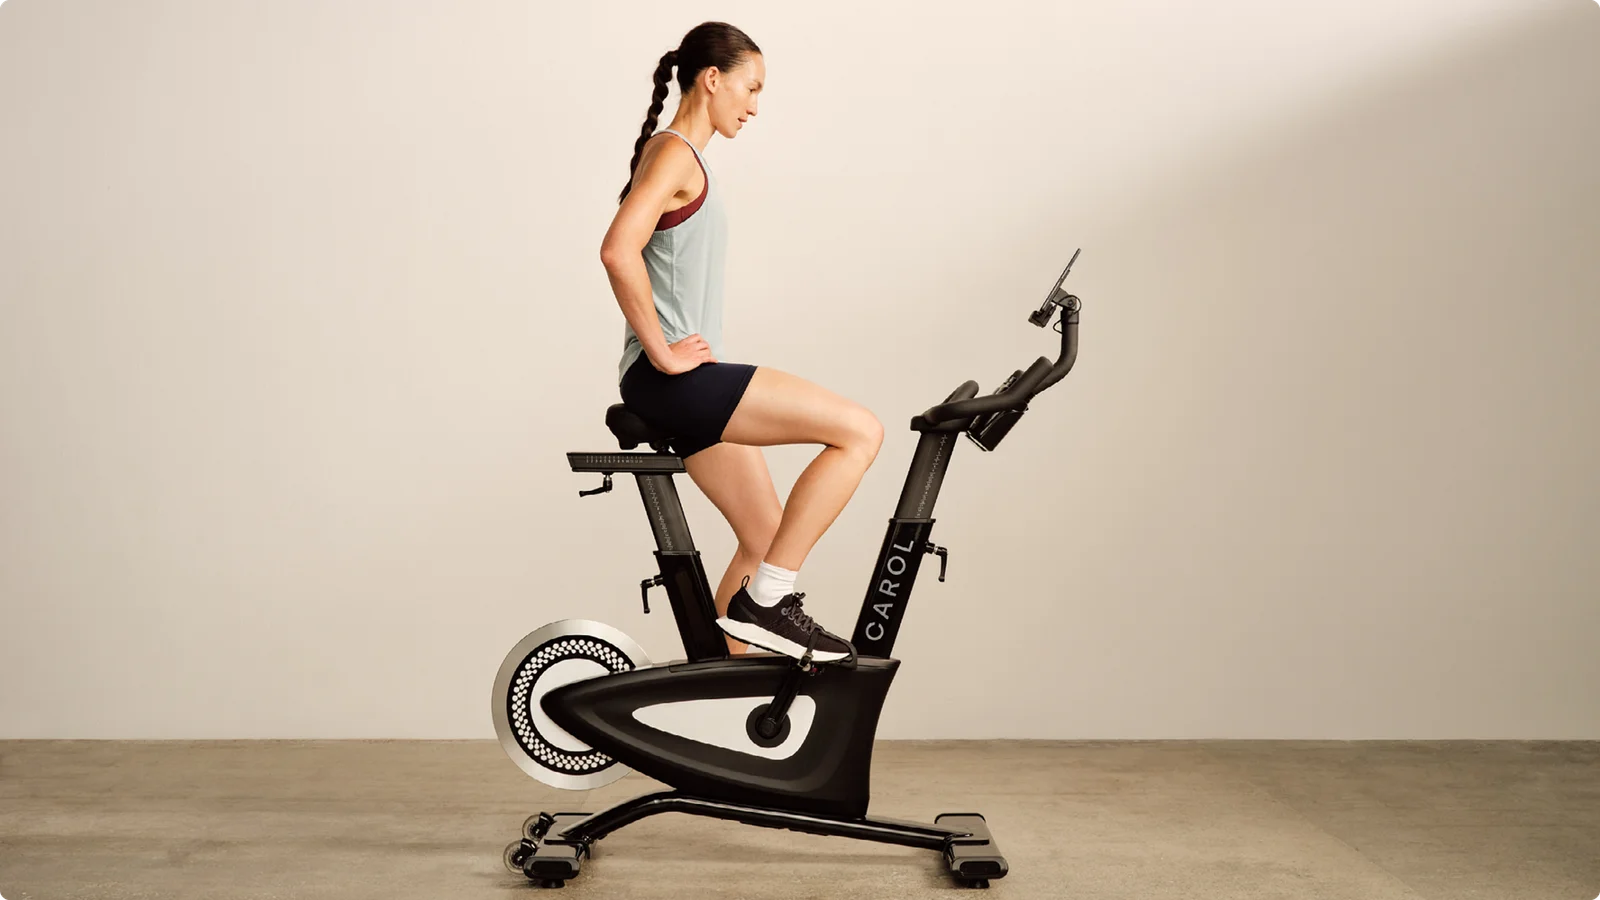 The 7 best home exercise equipment for weight loss